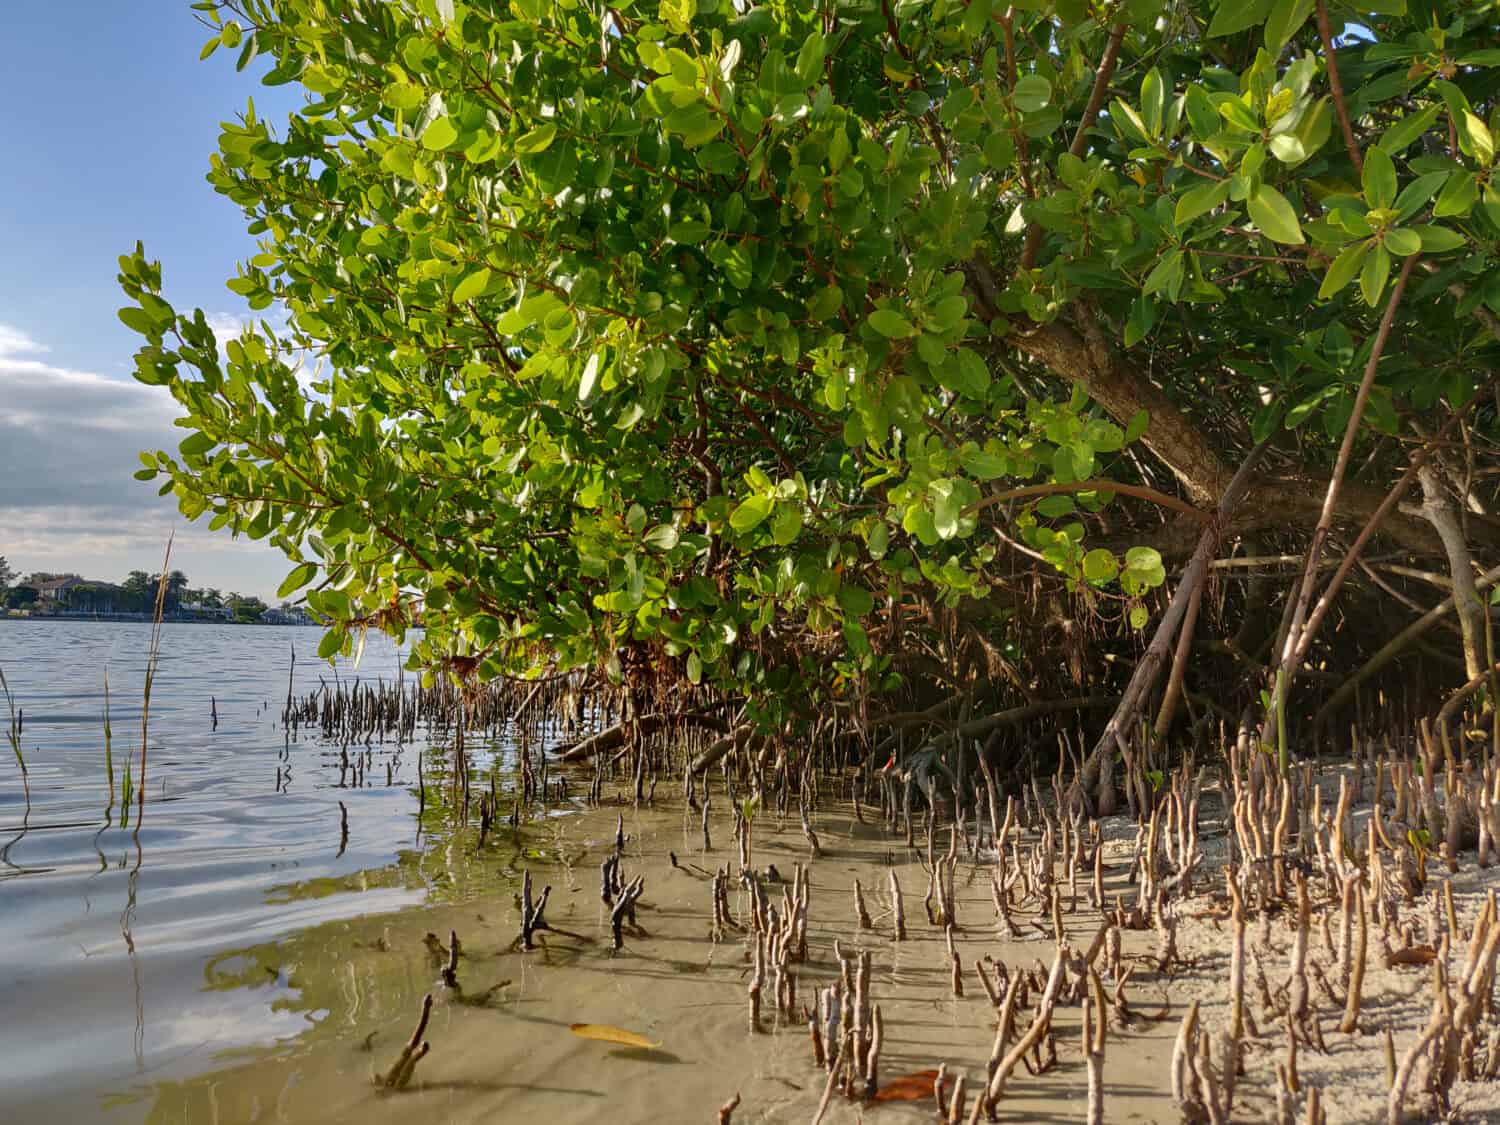 A mixed stand of stunted red mangroves (Rhizophora mangle) and black mangroves (Avicennia germinans) grows along the water's edge in an urban estuary in western Florida